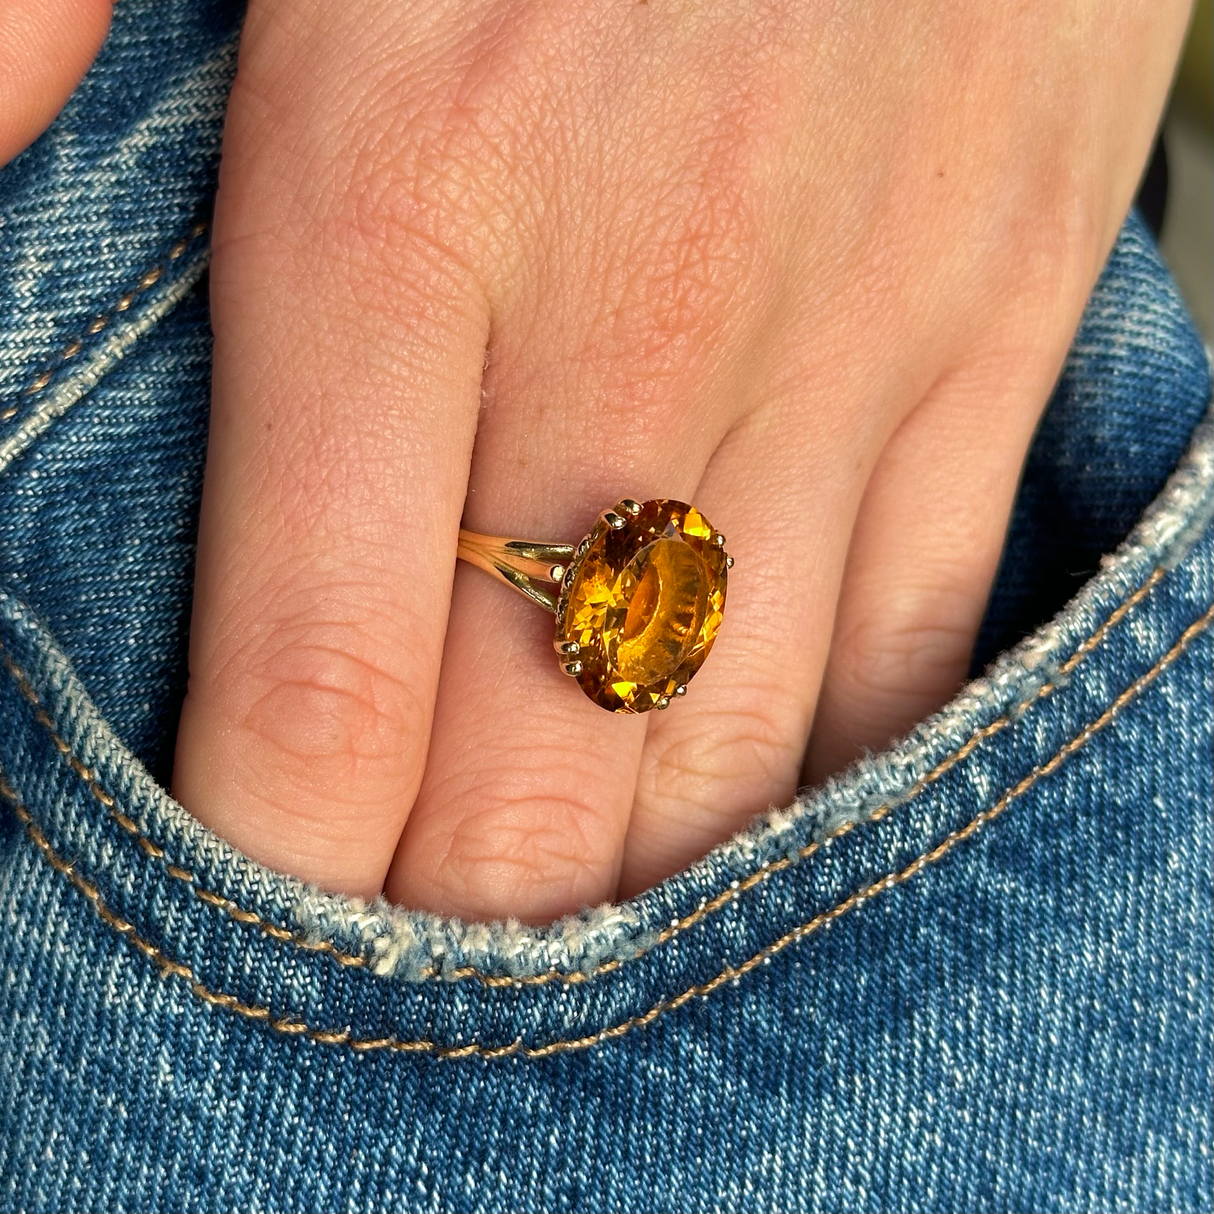 citrine cocktail ring worn on hand in pocket of jeans.